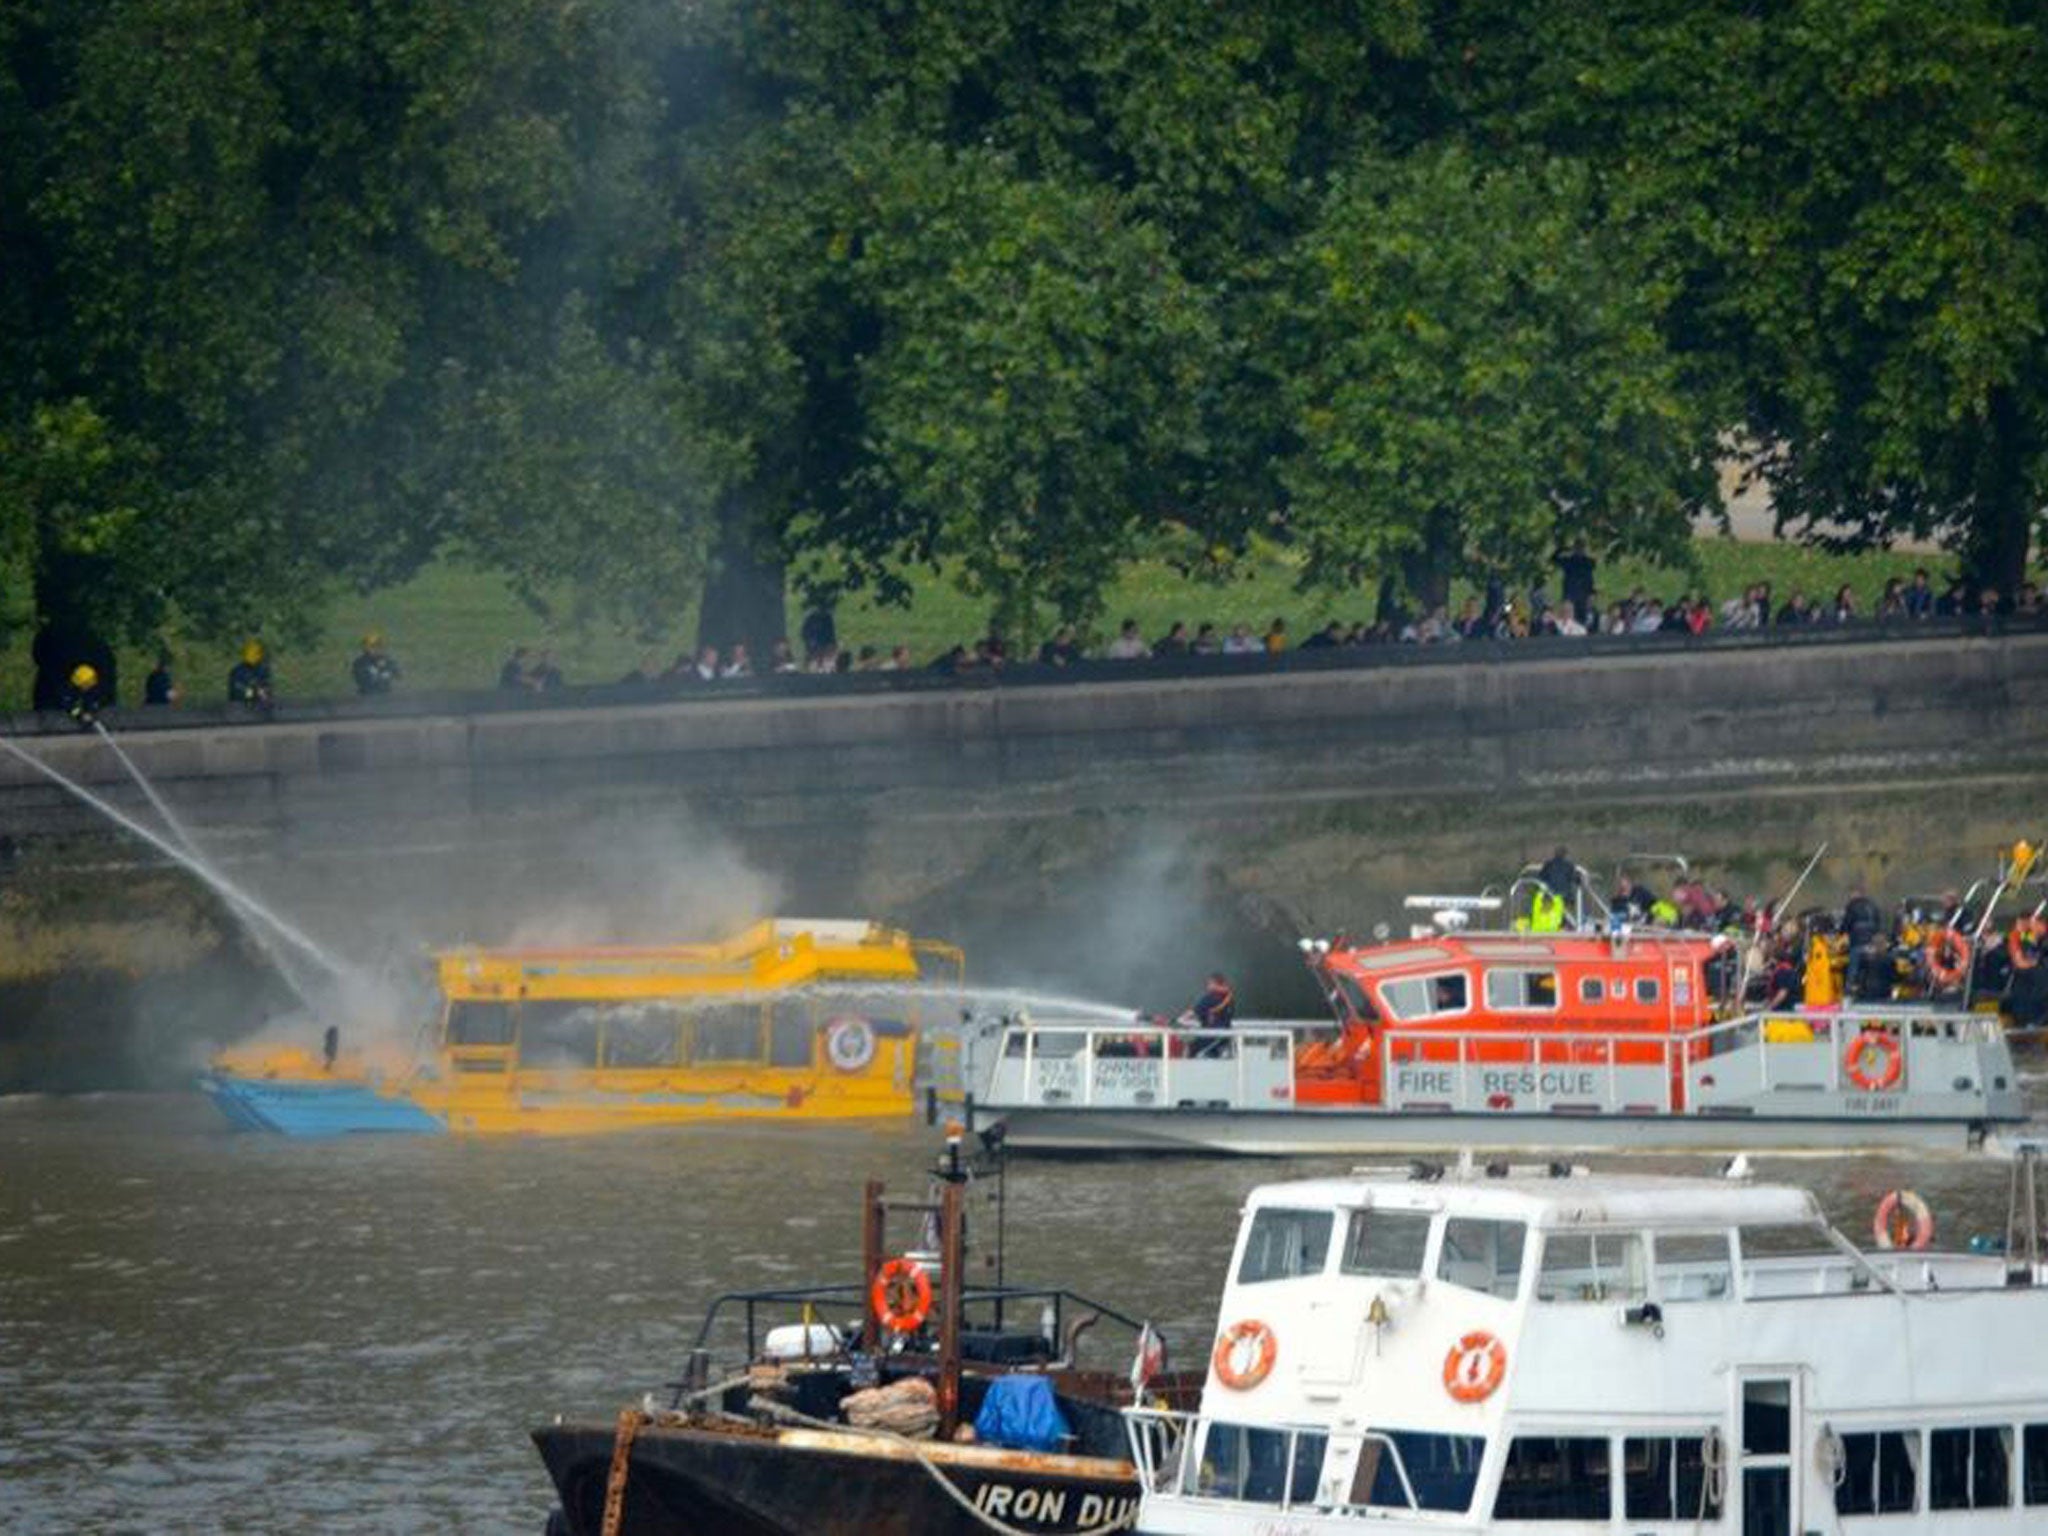 The London Duck Tours boat, left, as rescue services extinguish the flames after it caught on fire near to the houses of Parliament